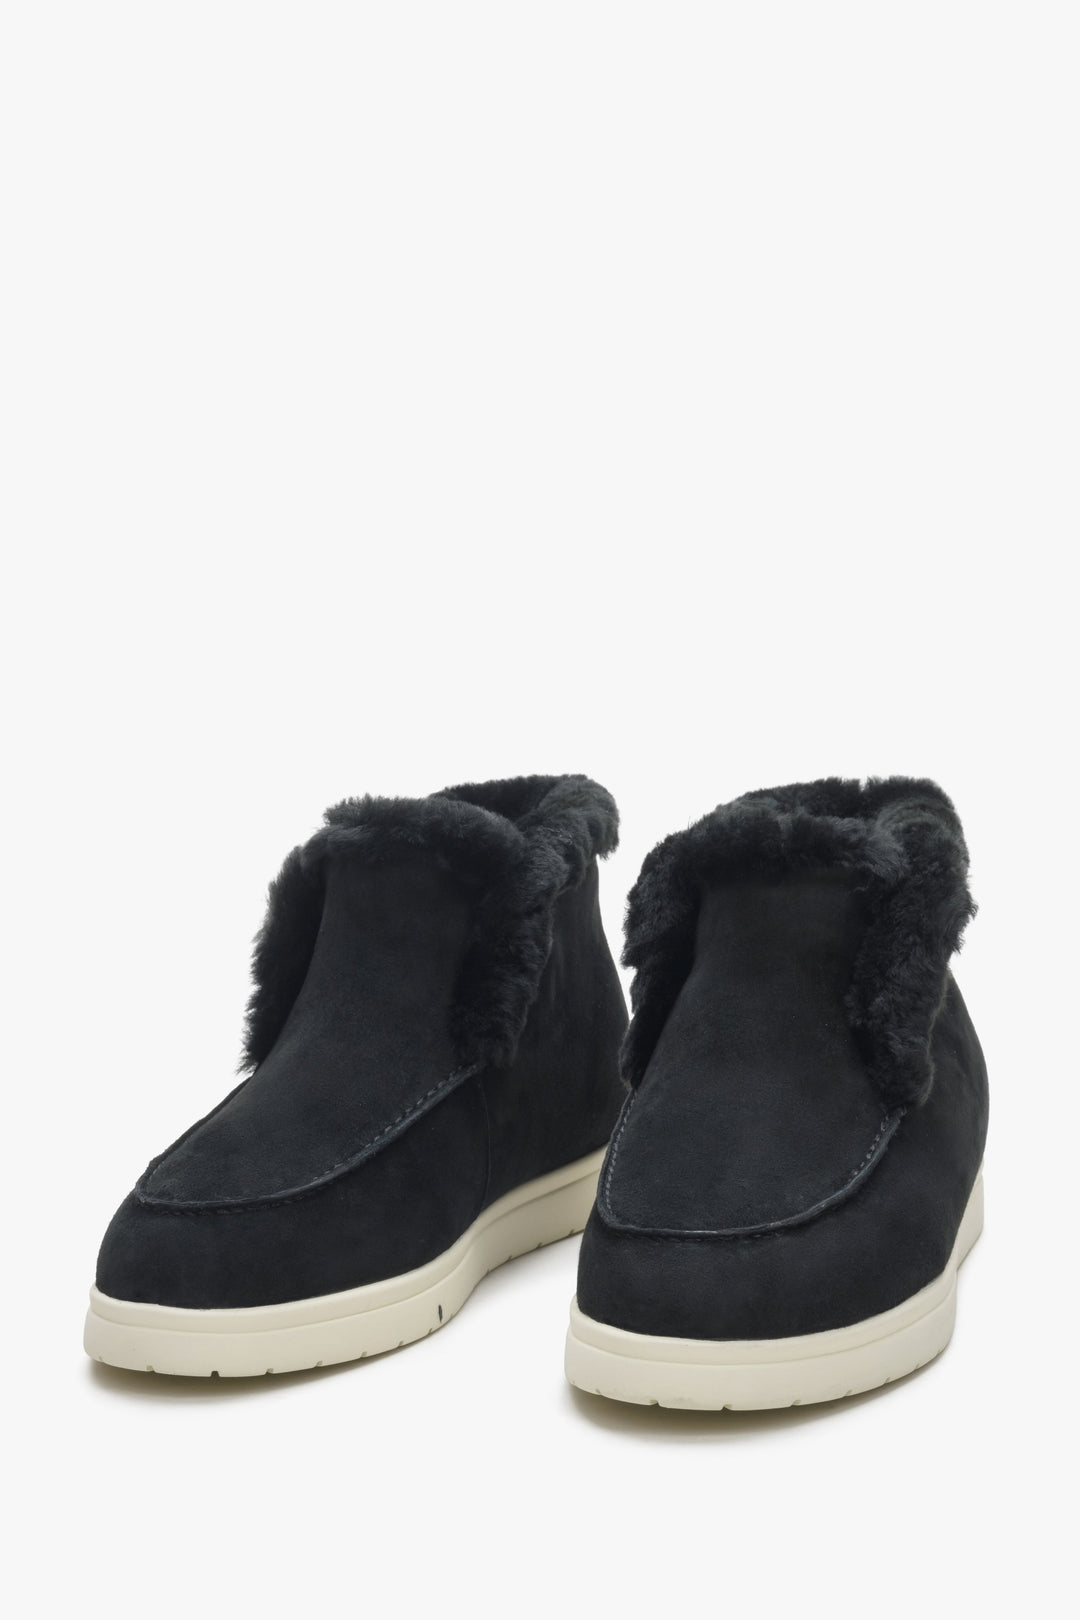 Low-top black slip on boots Estro with fur lining - presentation of the tip of the toes.